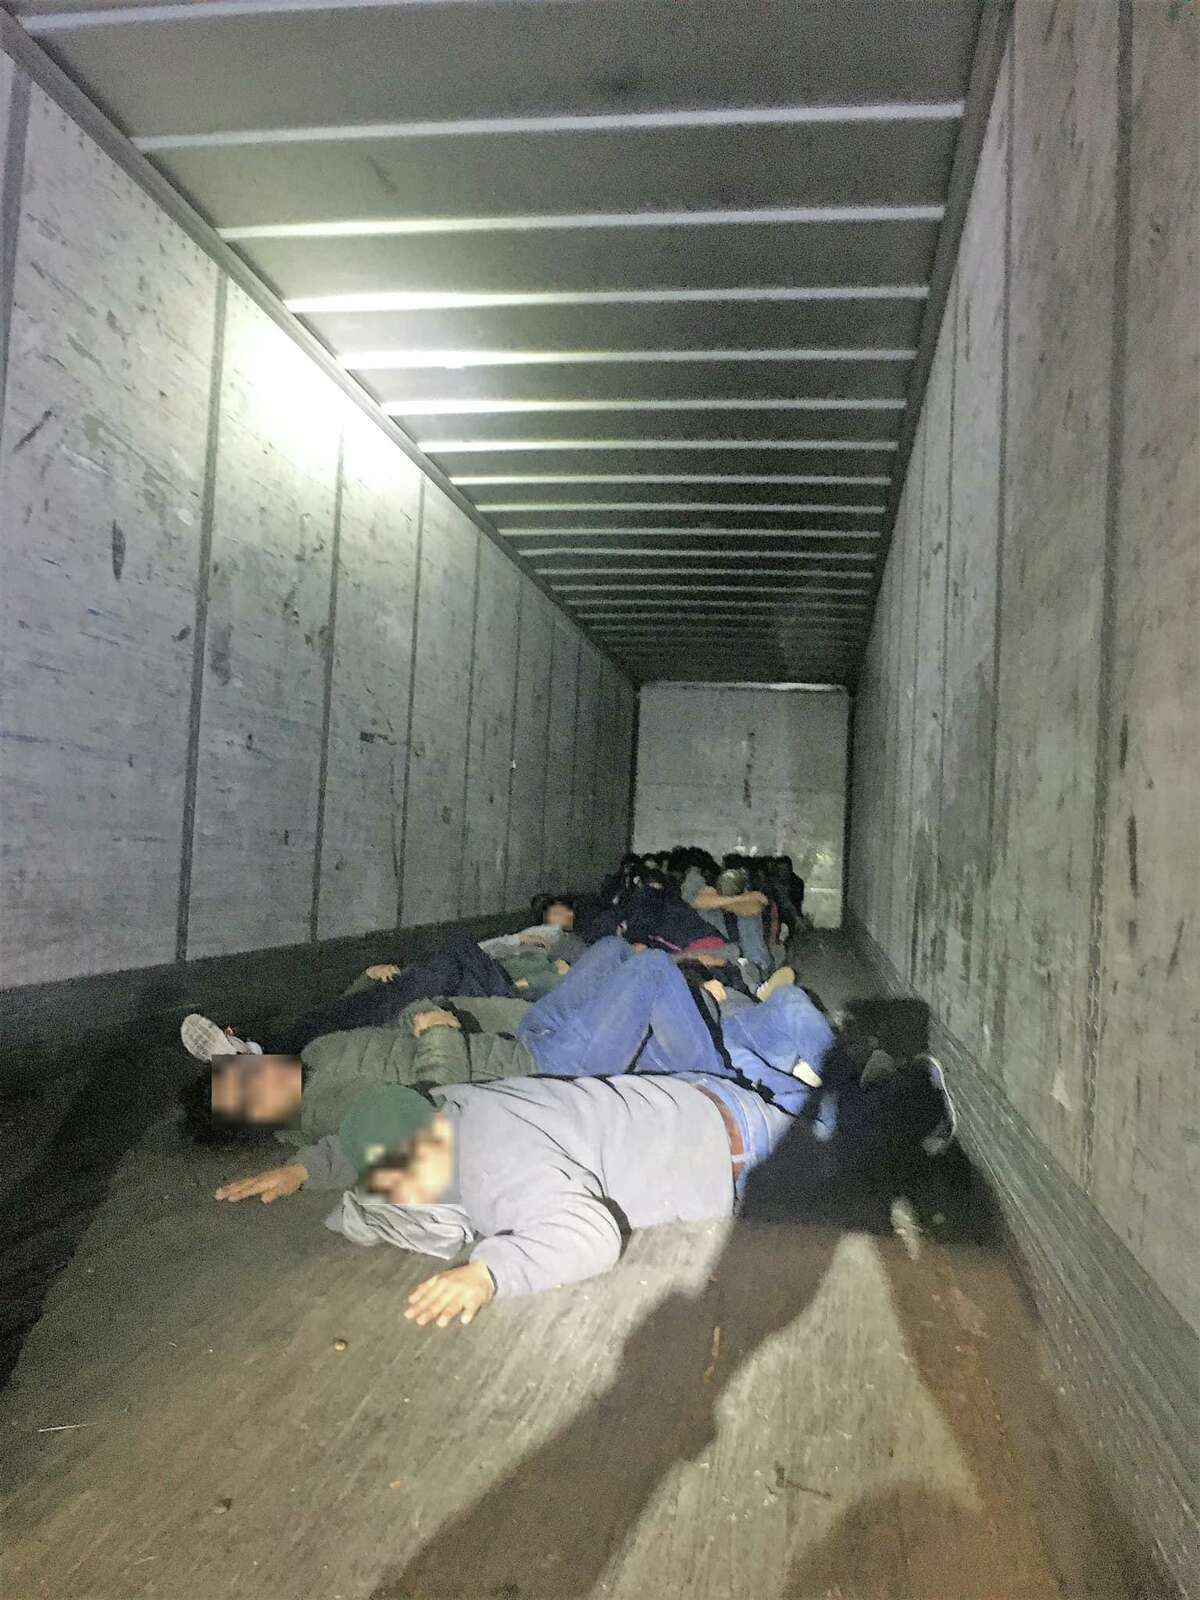 A total of six incidents in three days led to the discovery of nearly 100 people in the country illegally, according to the U.S. Border Patrol.